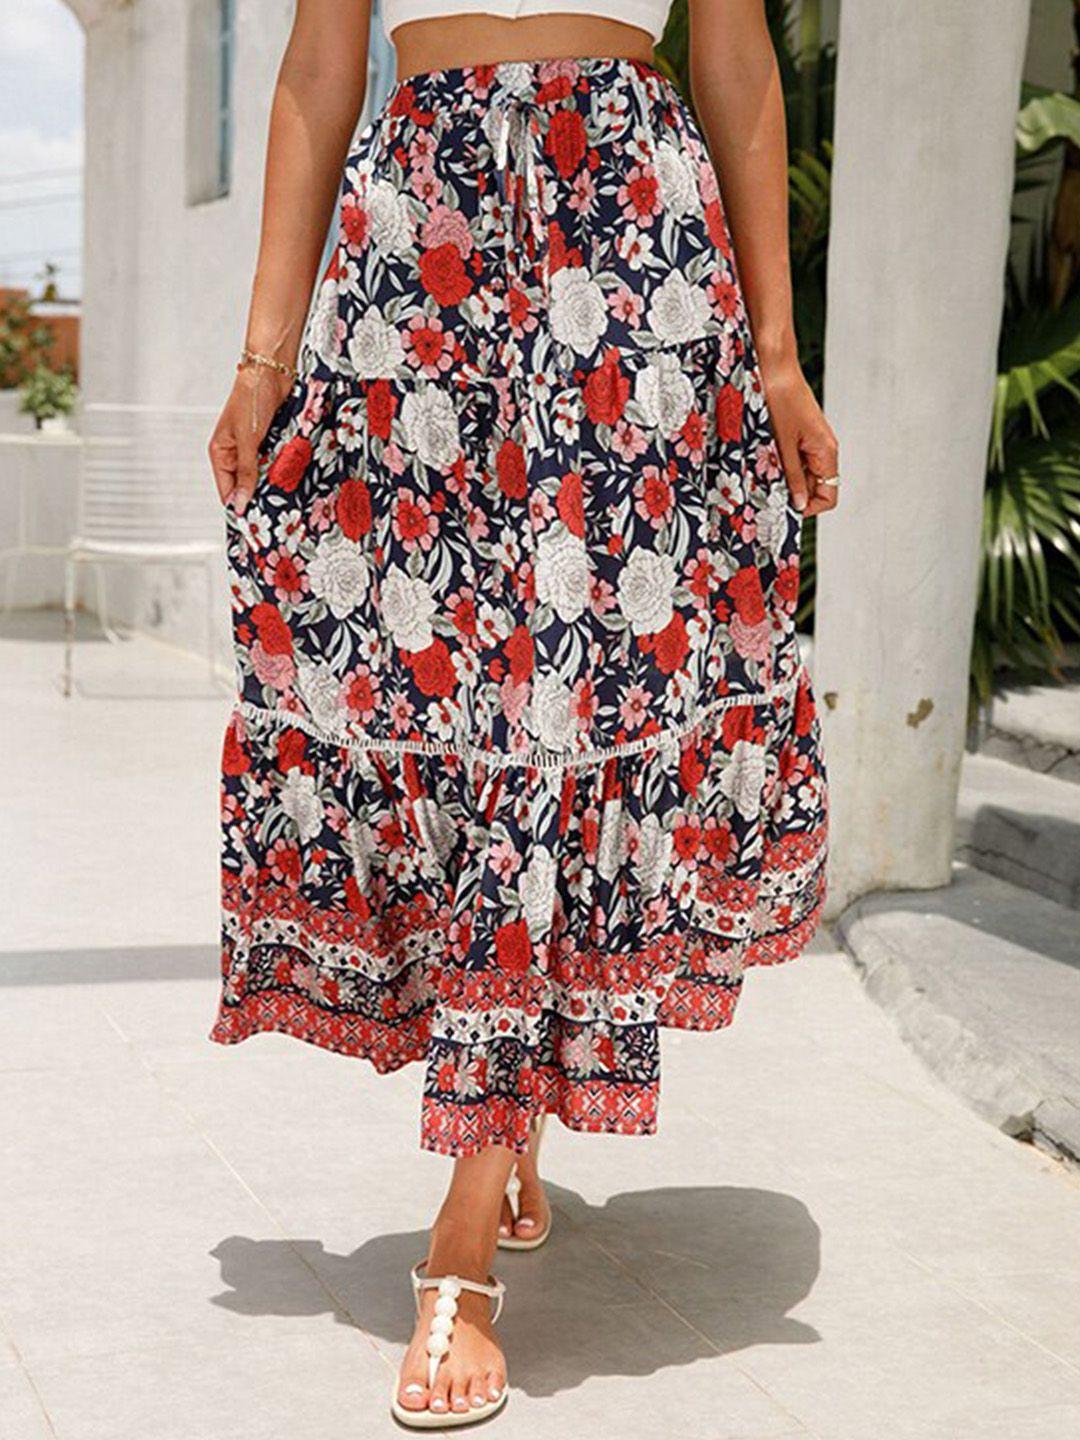 stylecast red floral printed flared midi skirt